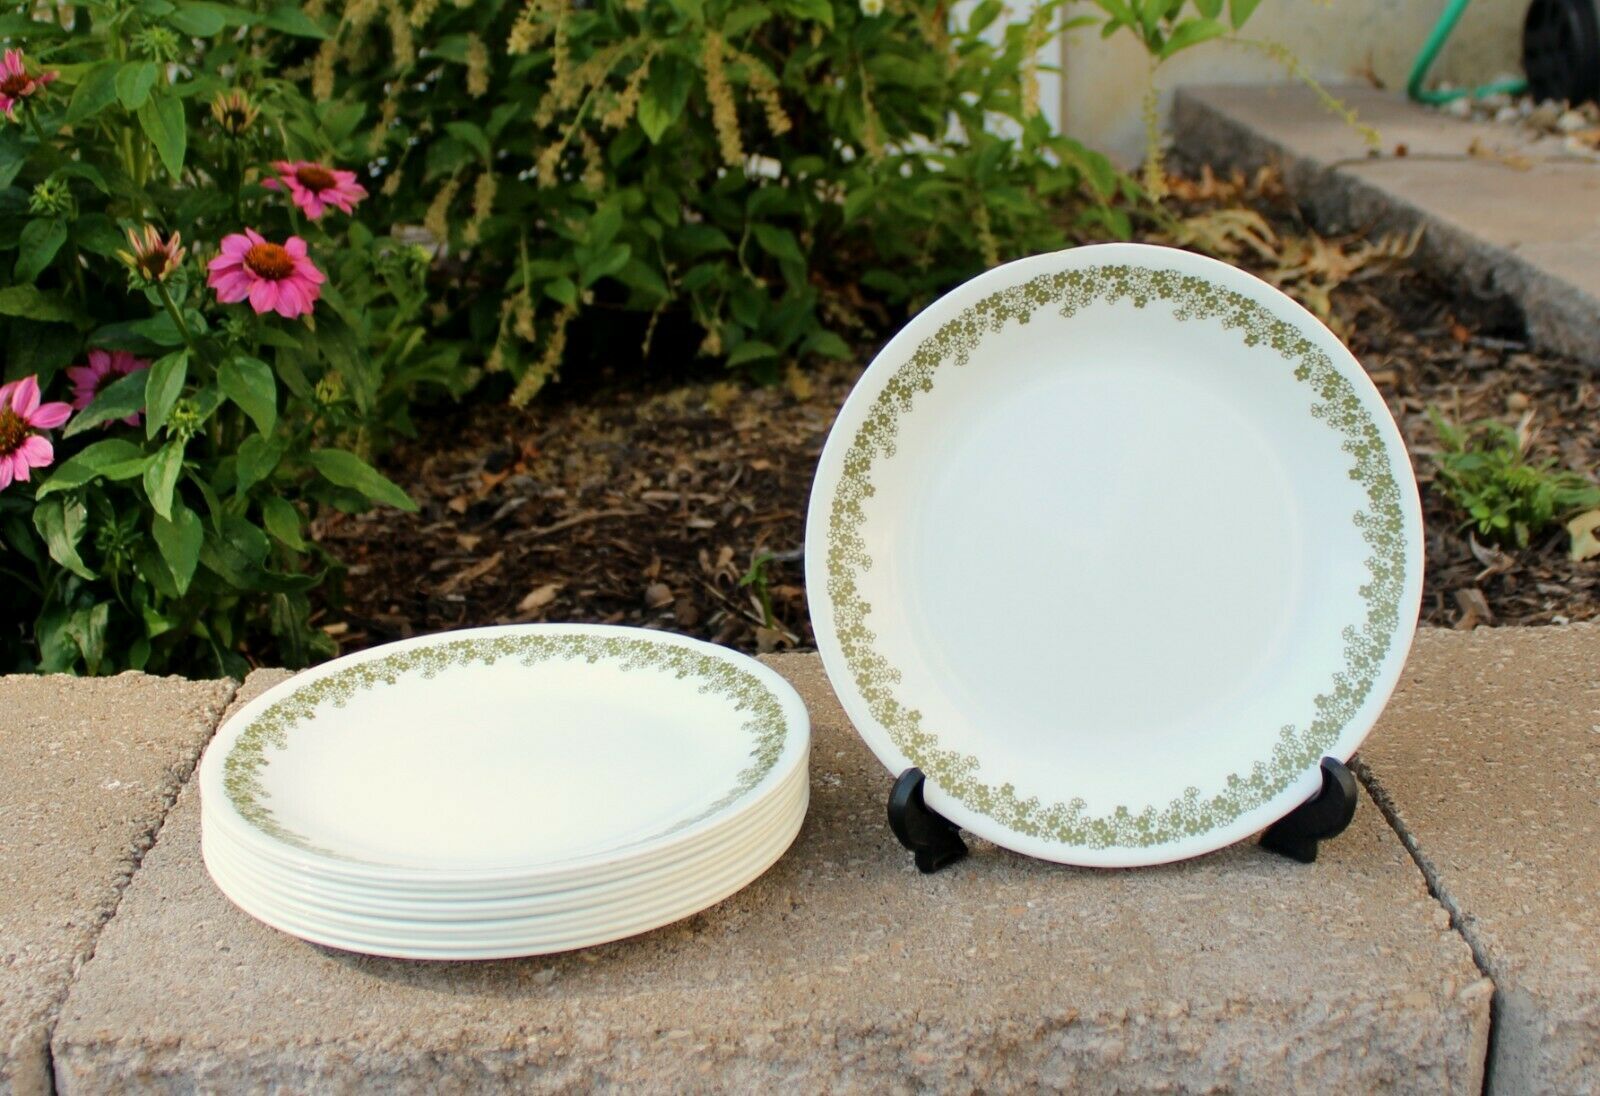 Crazy Daisy Corelle spring green  Choice bowls cereal Dinner or Salad Plates Vintage in sets of 4